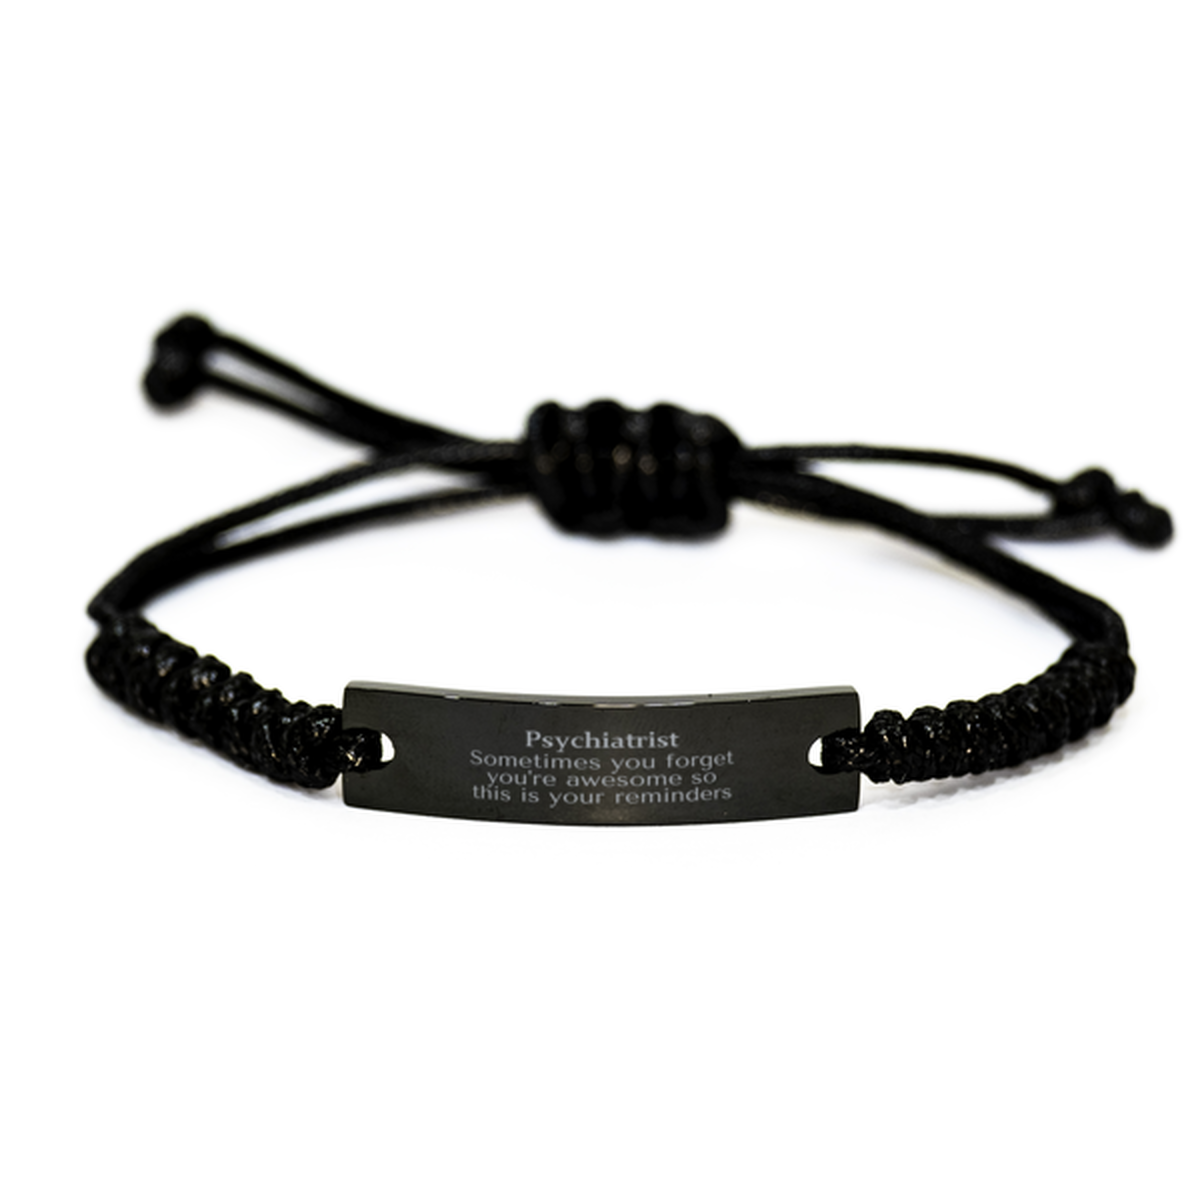 Sentimental Psychiatrist Black Rope Bracelet, Psychiatrist Sometimes you forget you're awesome so this is your reminders, Graduation Christmas Birthday Gifts for Psychiatrist, Men, Women, Coworkers